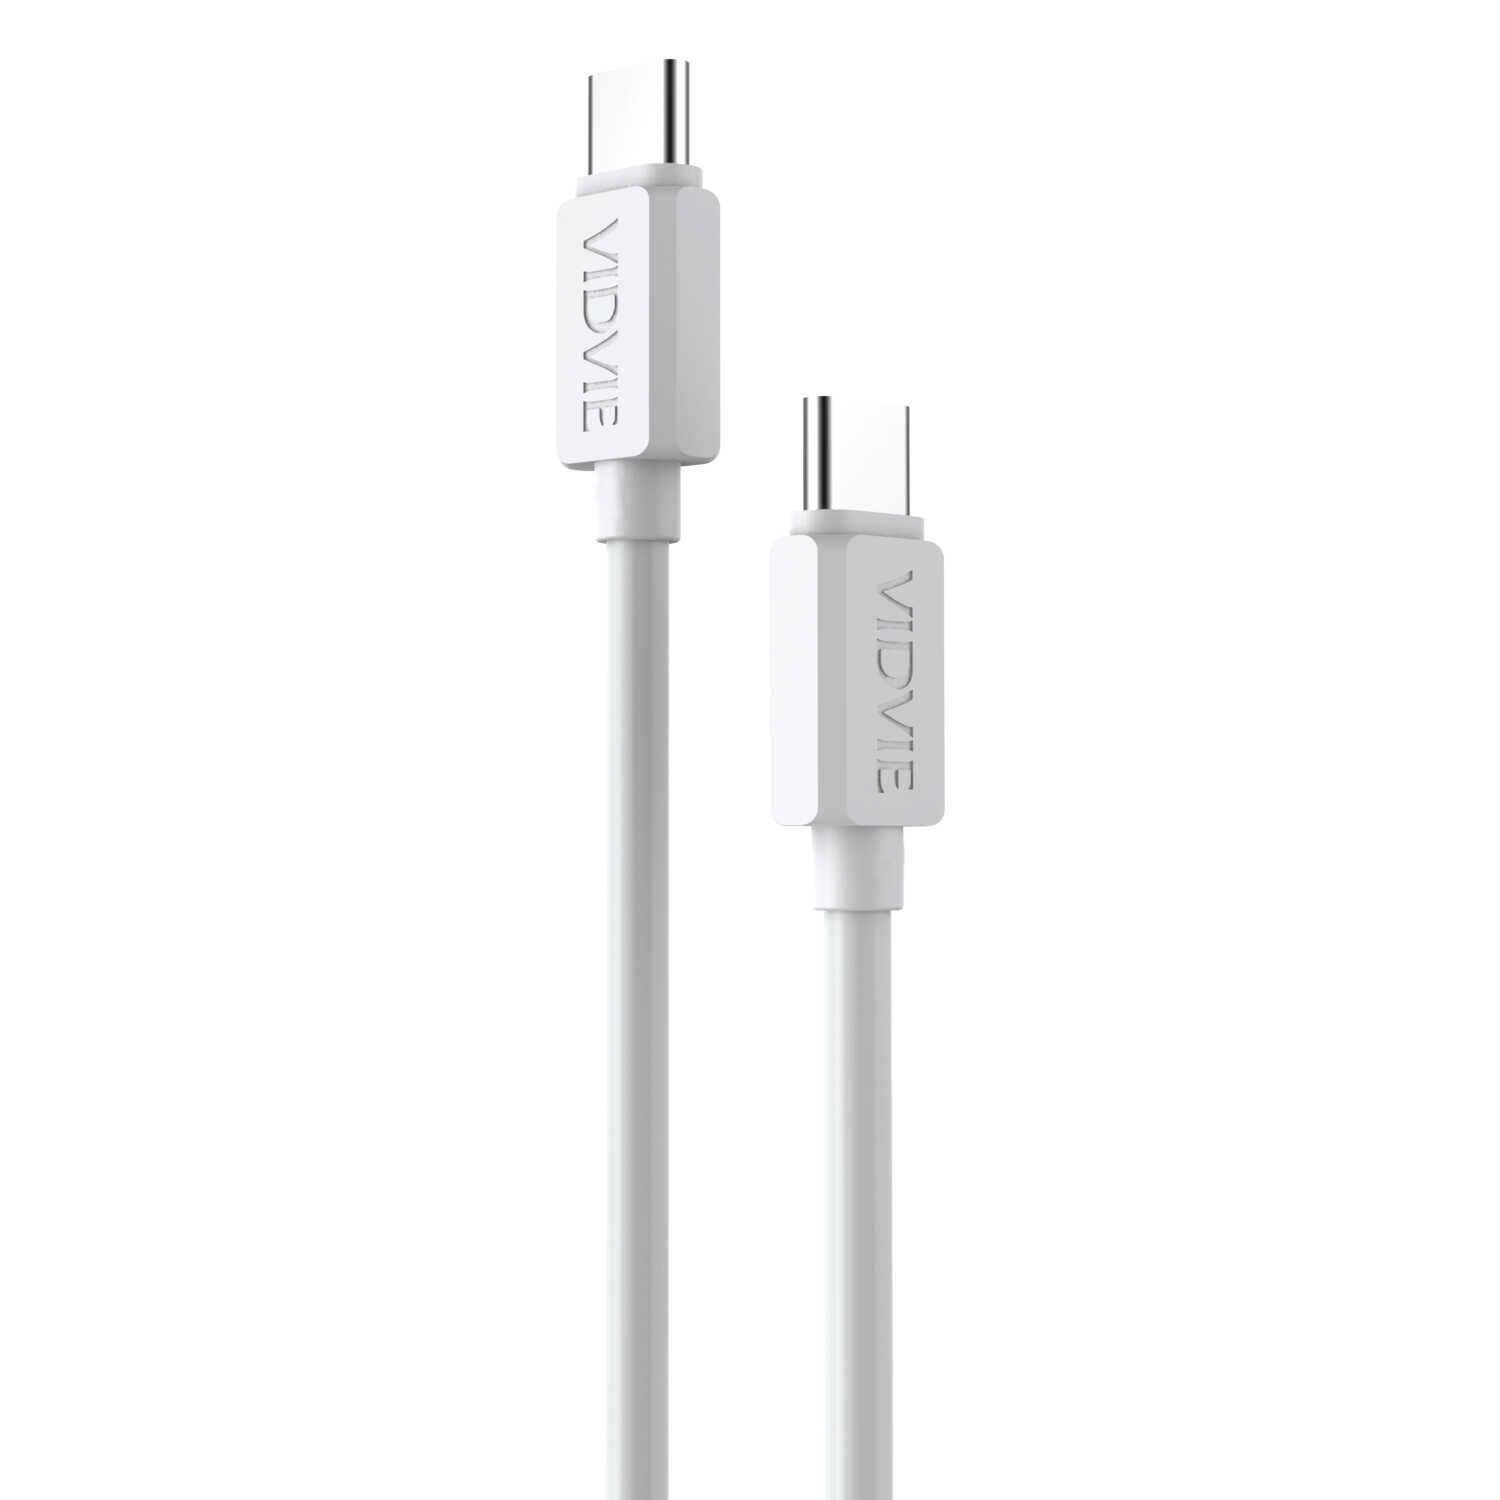 CABLE USB TYPE-C TO TYPE C DATA & CHARGE VIDVIE CB463 تايب سي الى تايب سي ,Other Smartphone Acc